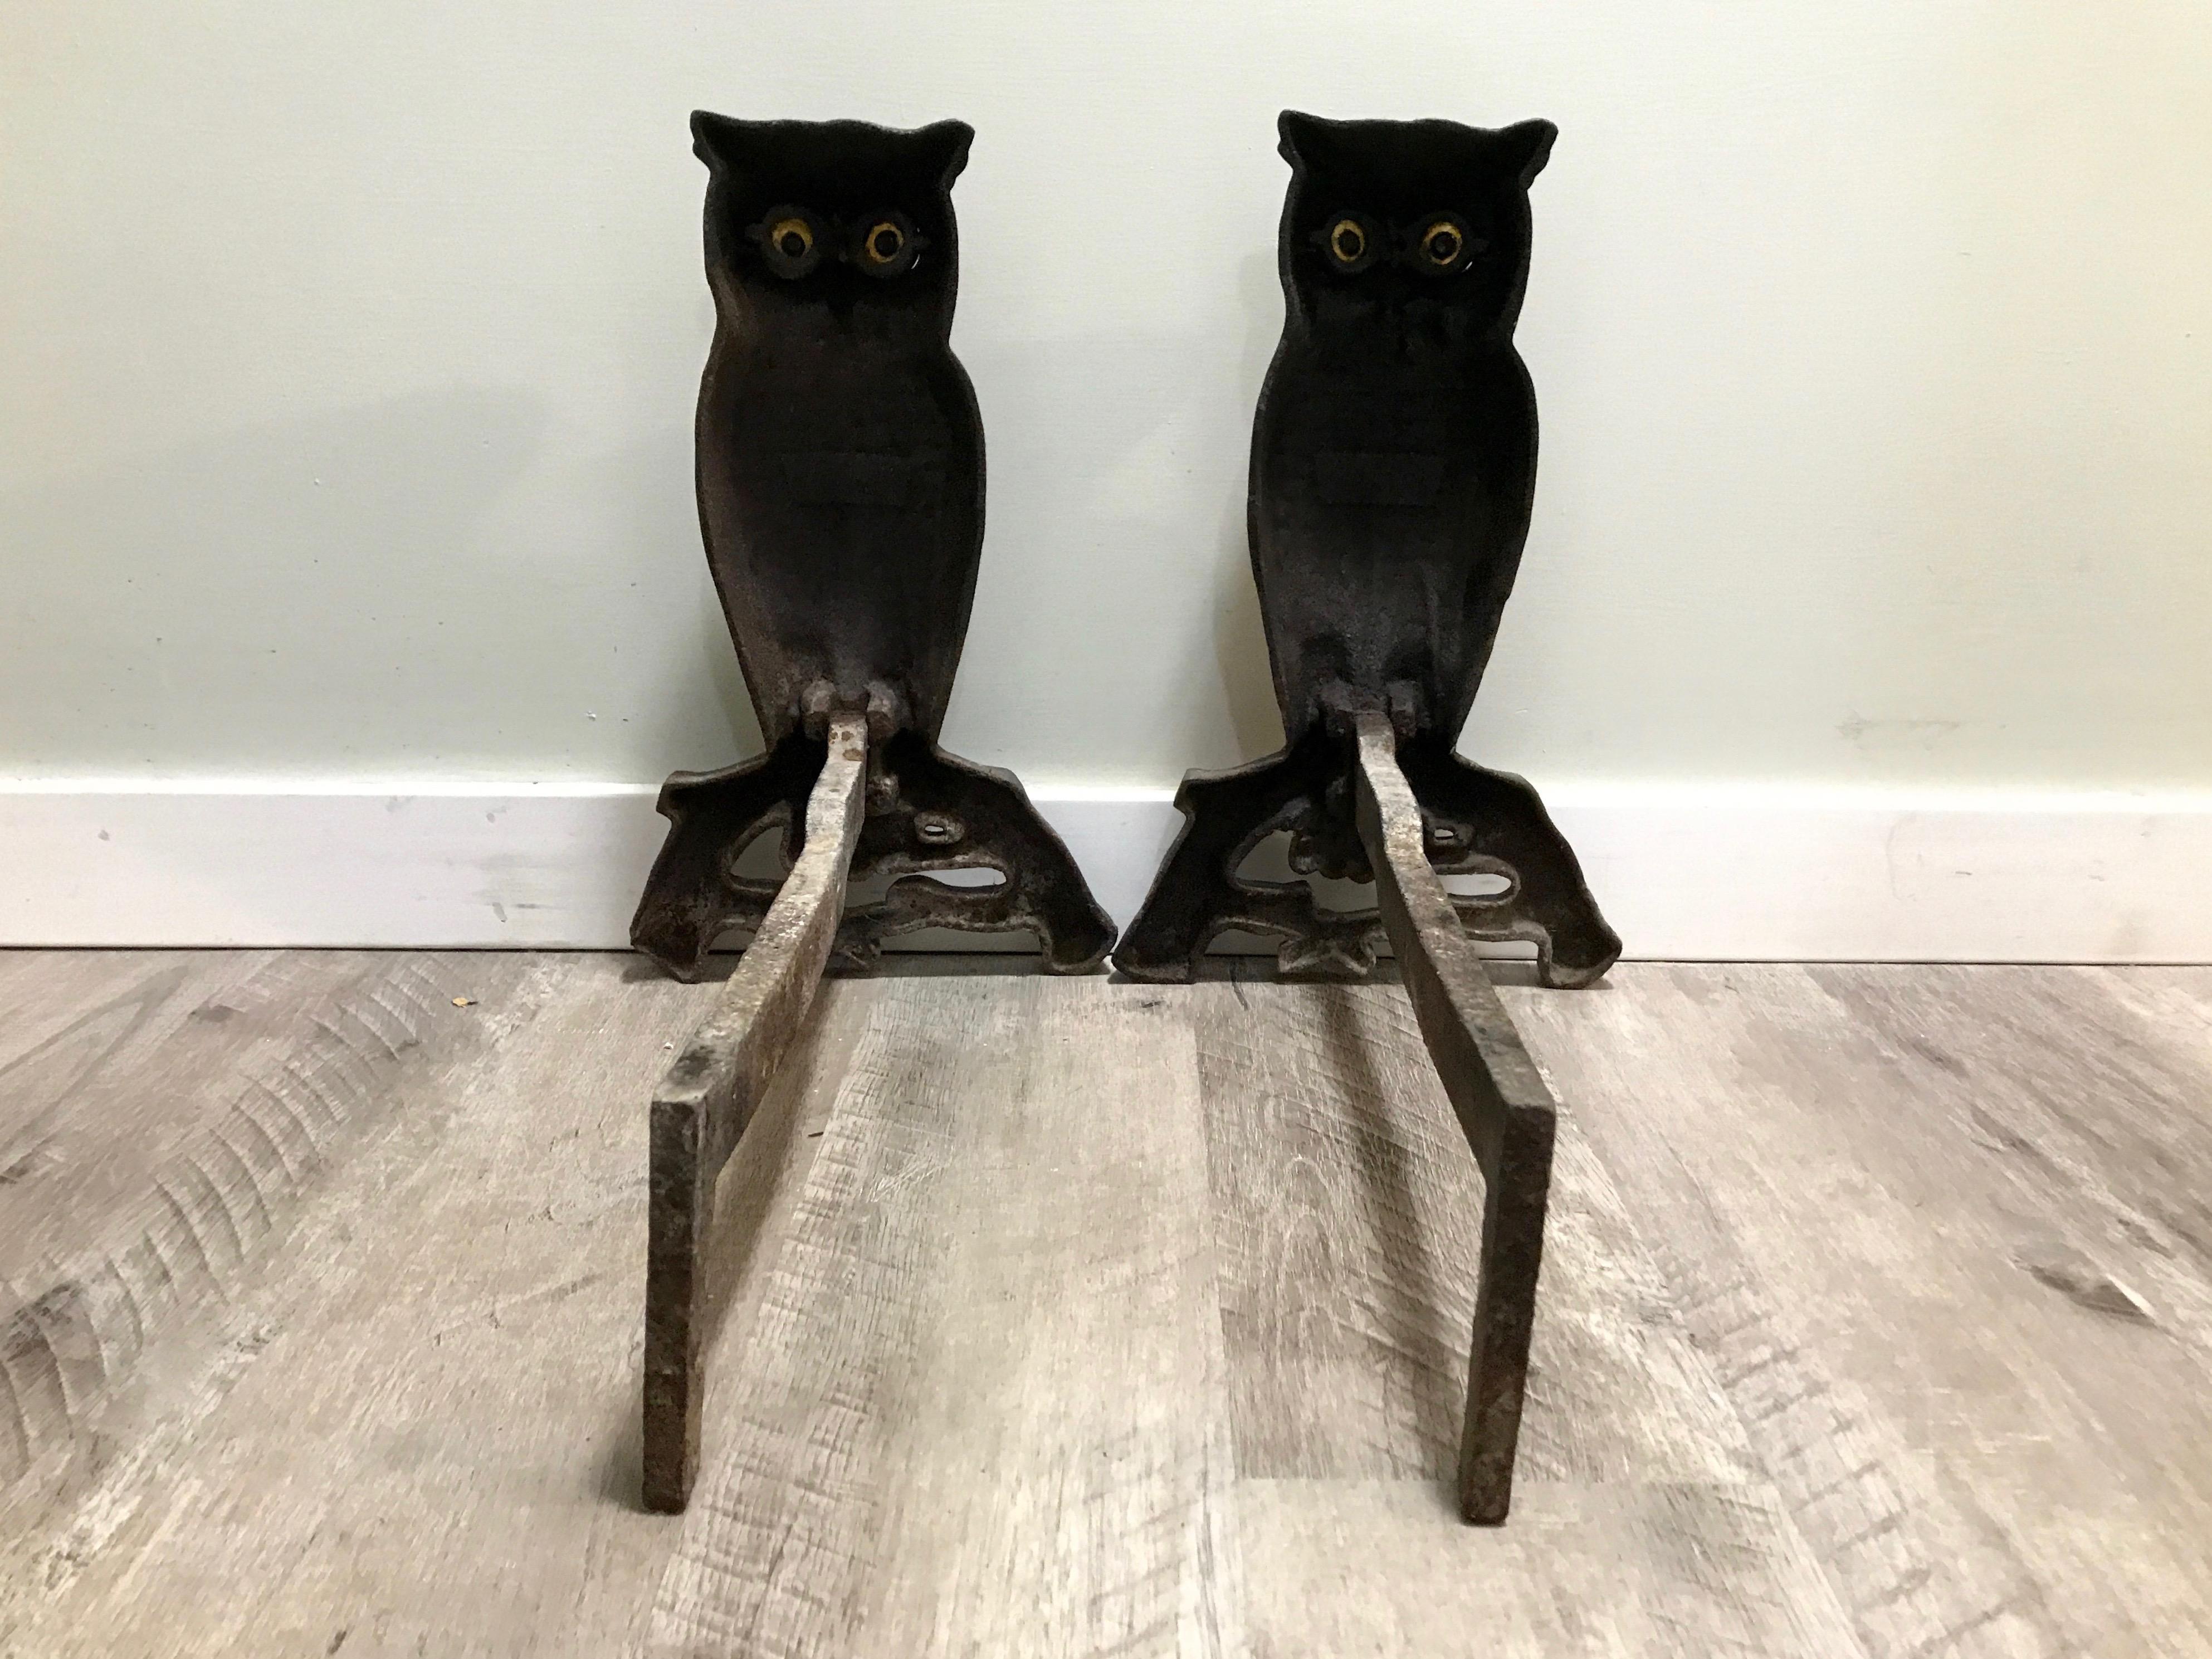 Cast iron owl form andirons with glass eyes through which the fire glows. These were around the turn of the century (1900). The glass eyes are in tact with one small hairline crack, but not all the way through nor does it affect its functionality.